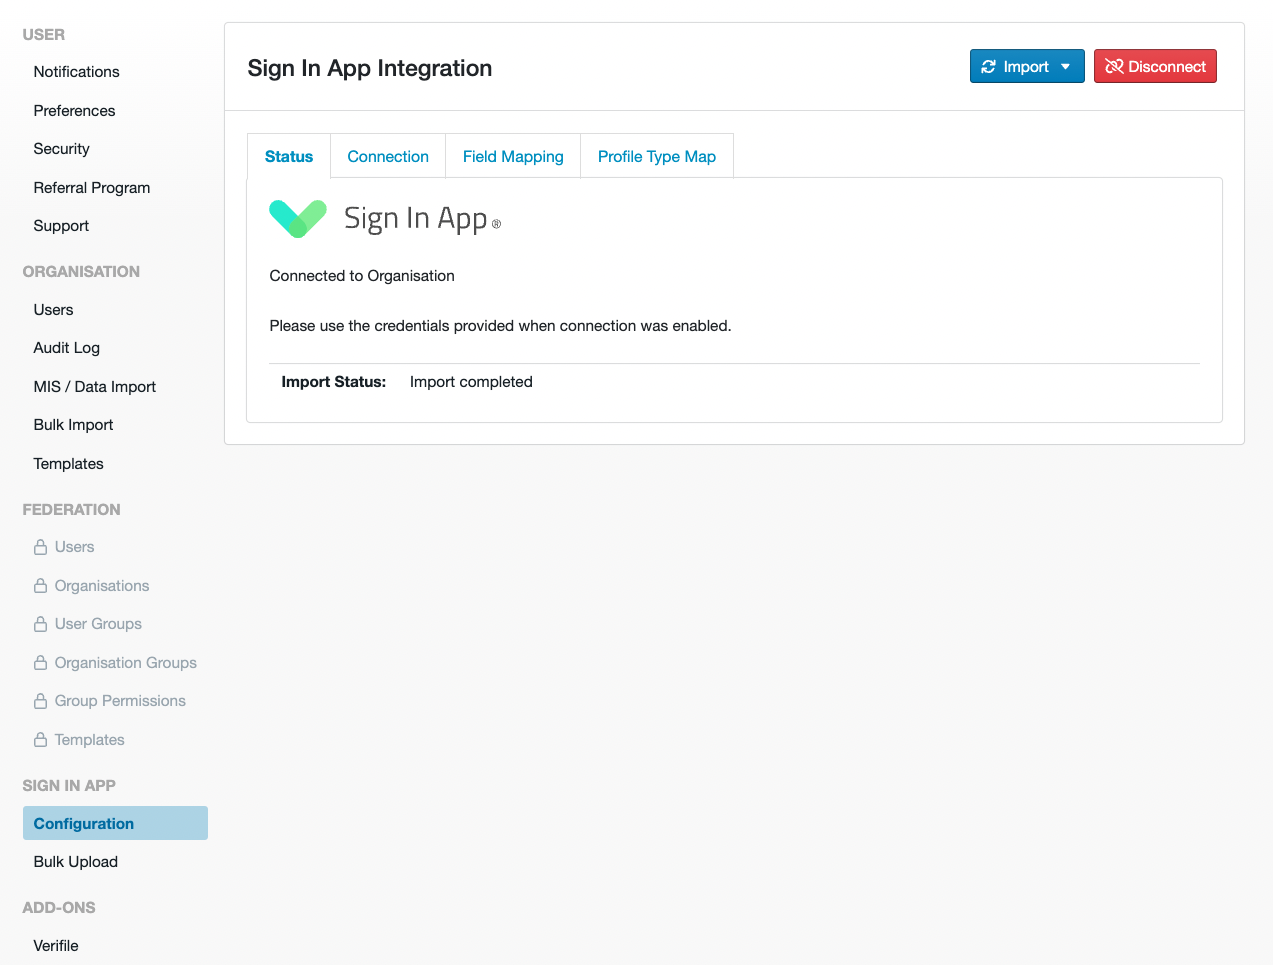 Sign In App portal showing optin to select SICR organisation